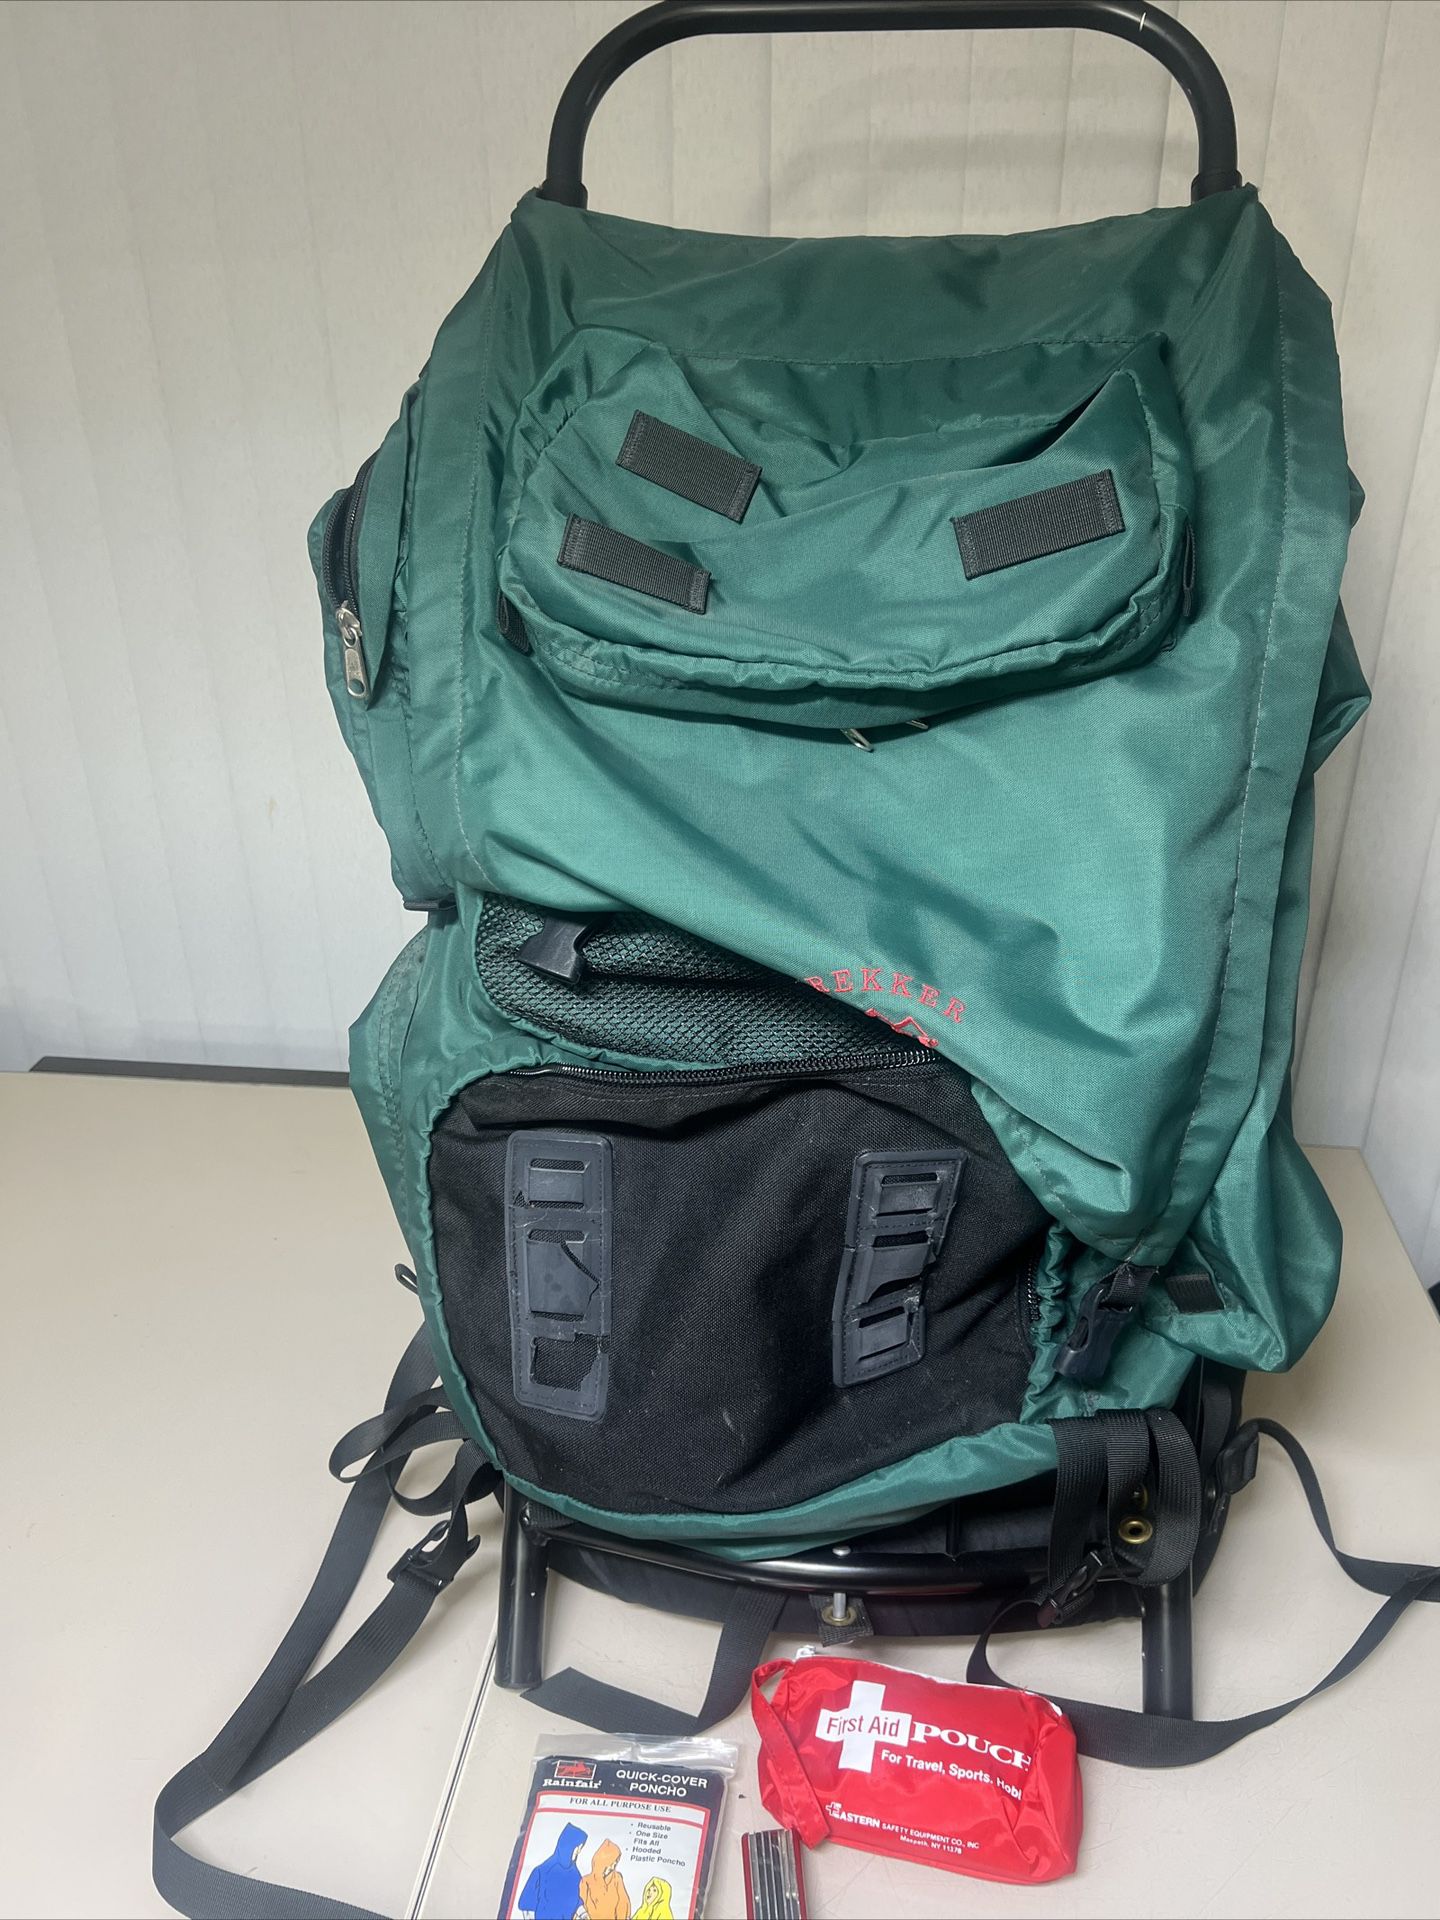 REI Trekker Wonderland External Aluminum Frame Light weight Backpack M/L READ. Used in good condition with a couple of blemishes. One, the front rubbe